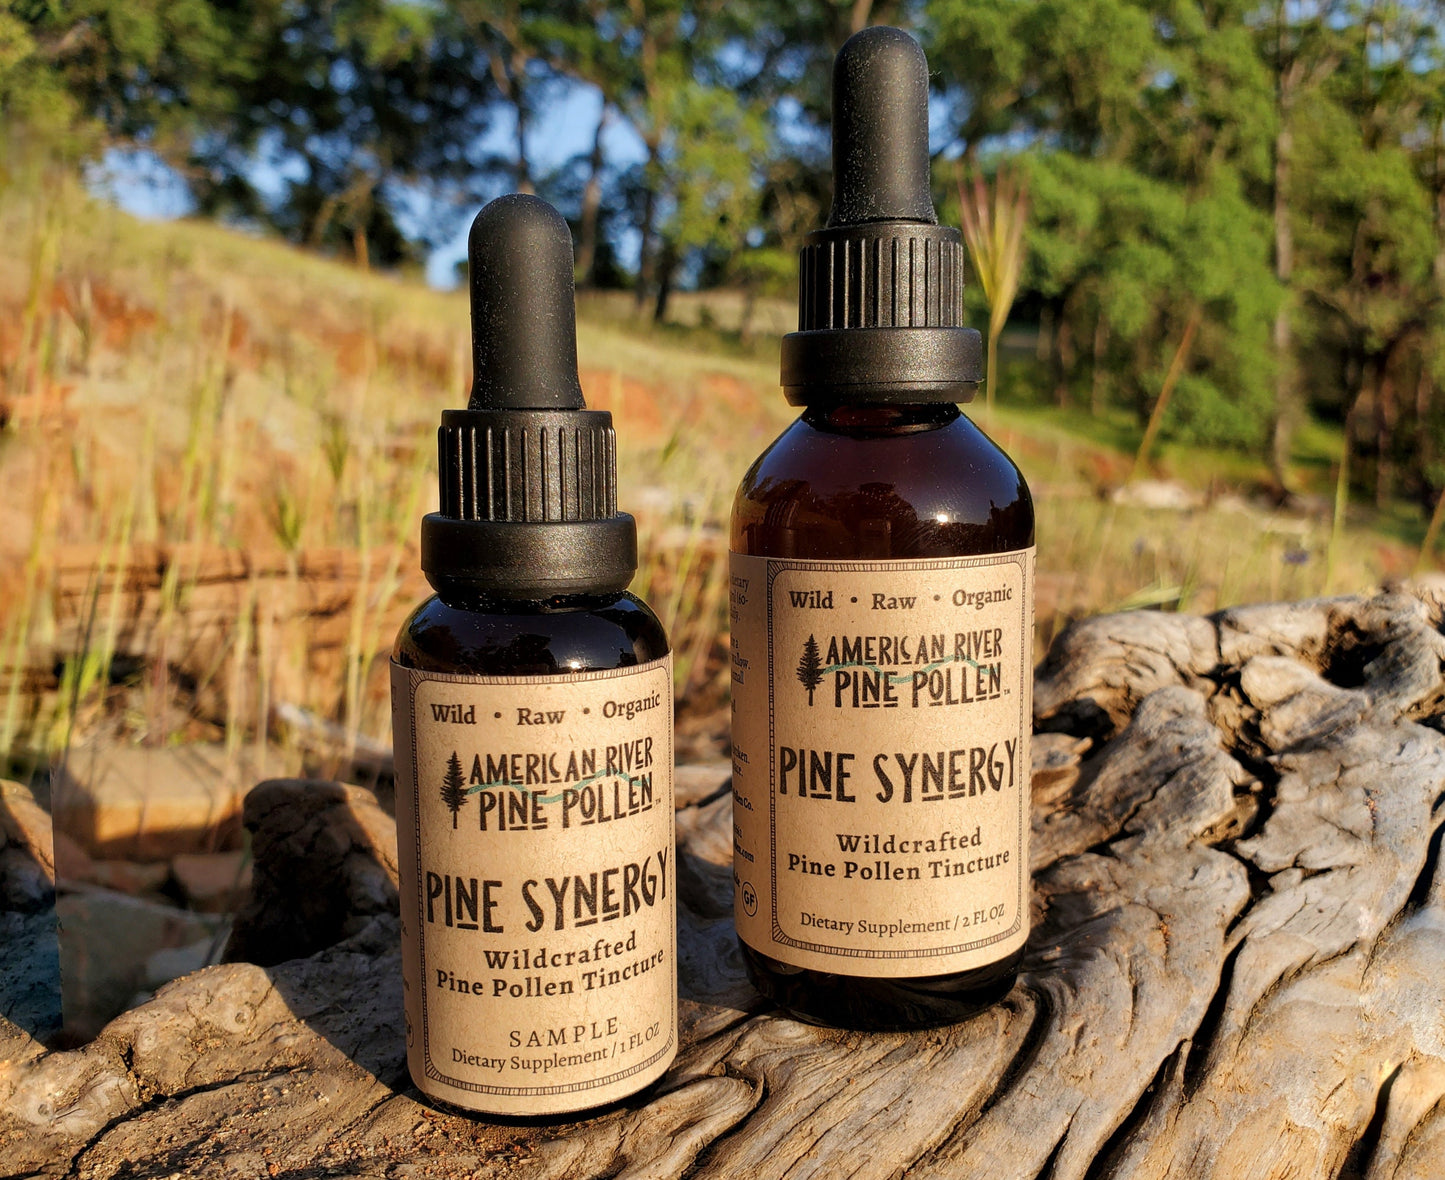 Wildcrafted USA Pine Pollen Tincture/Extract - Pine Synergy